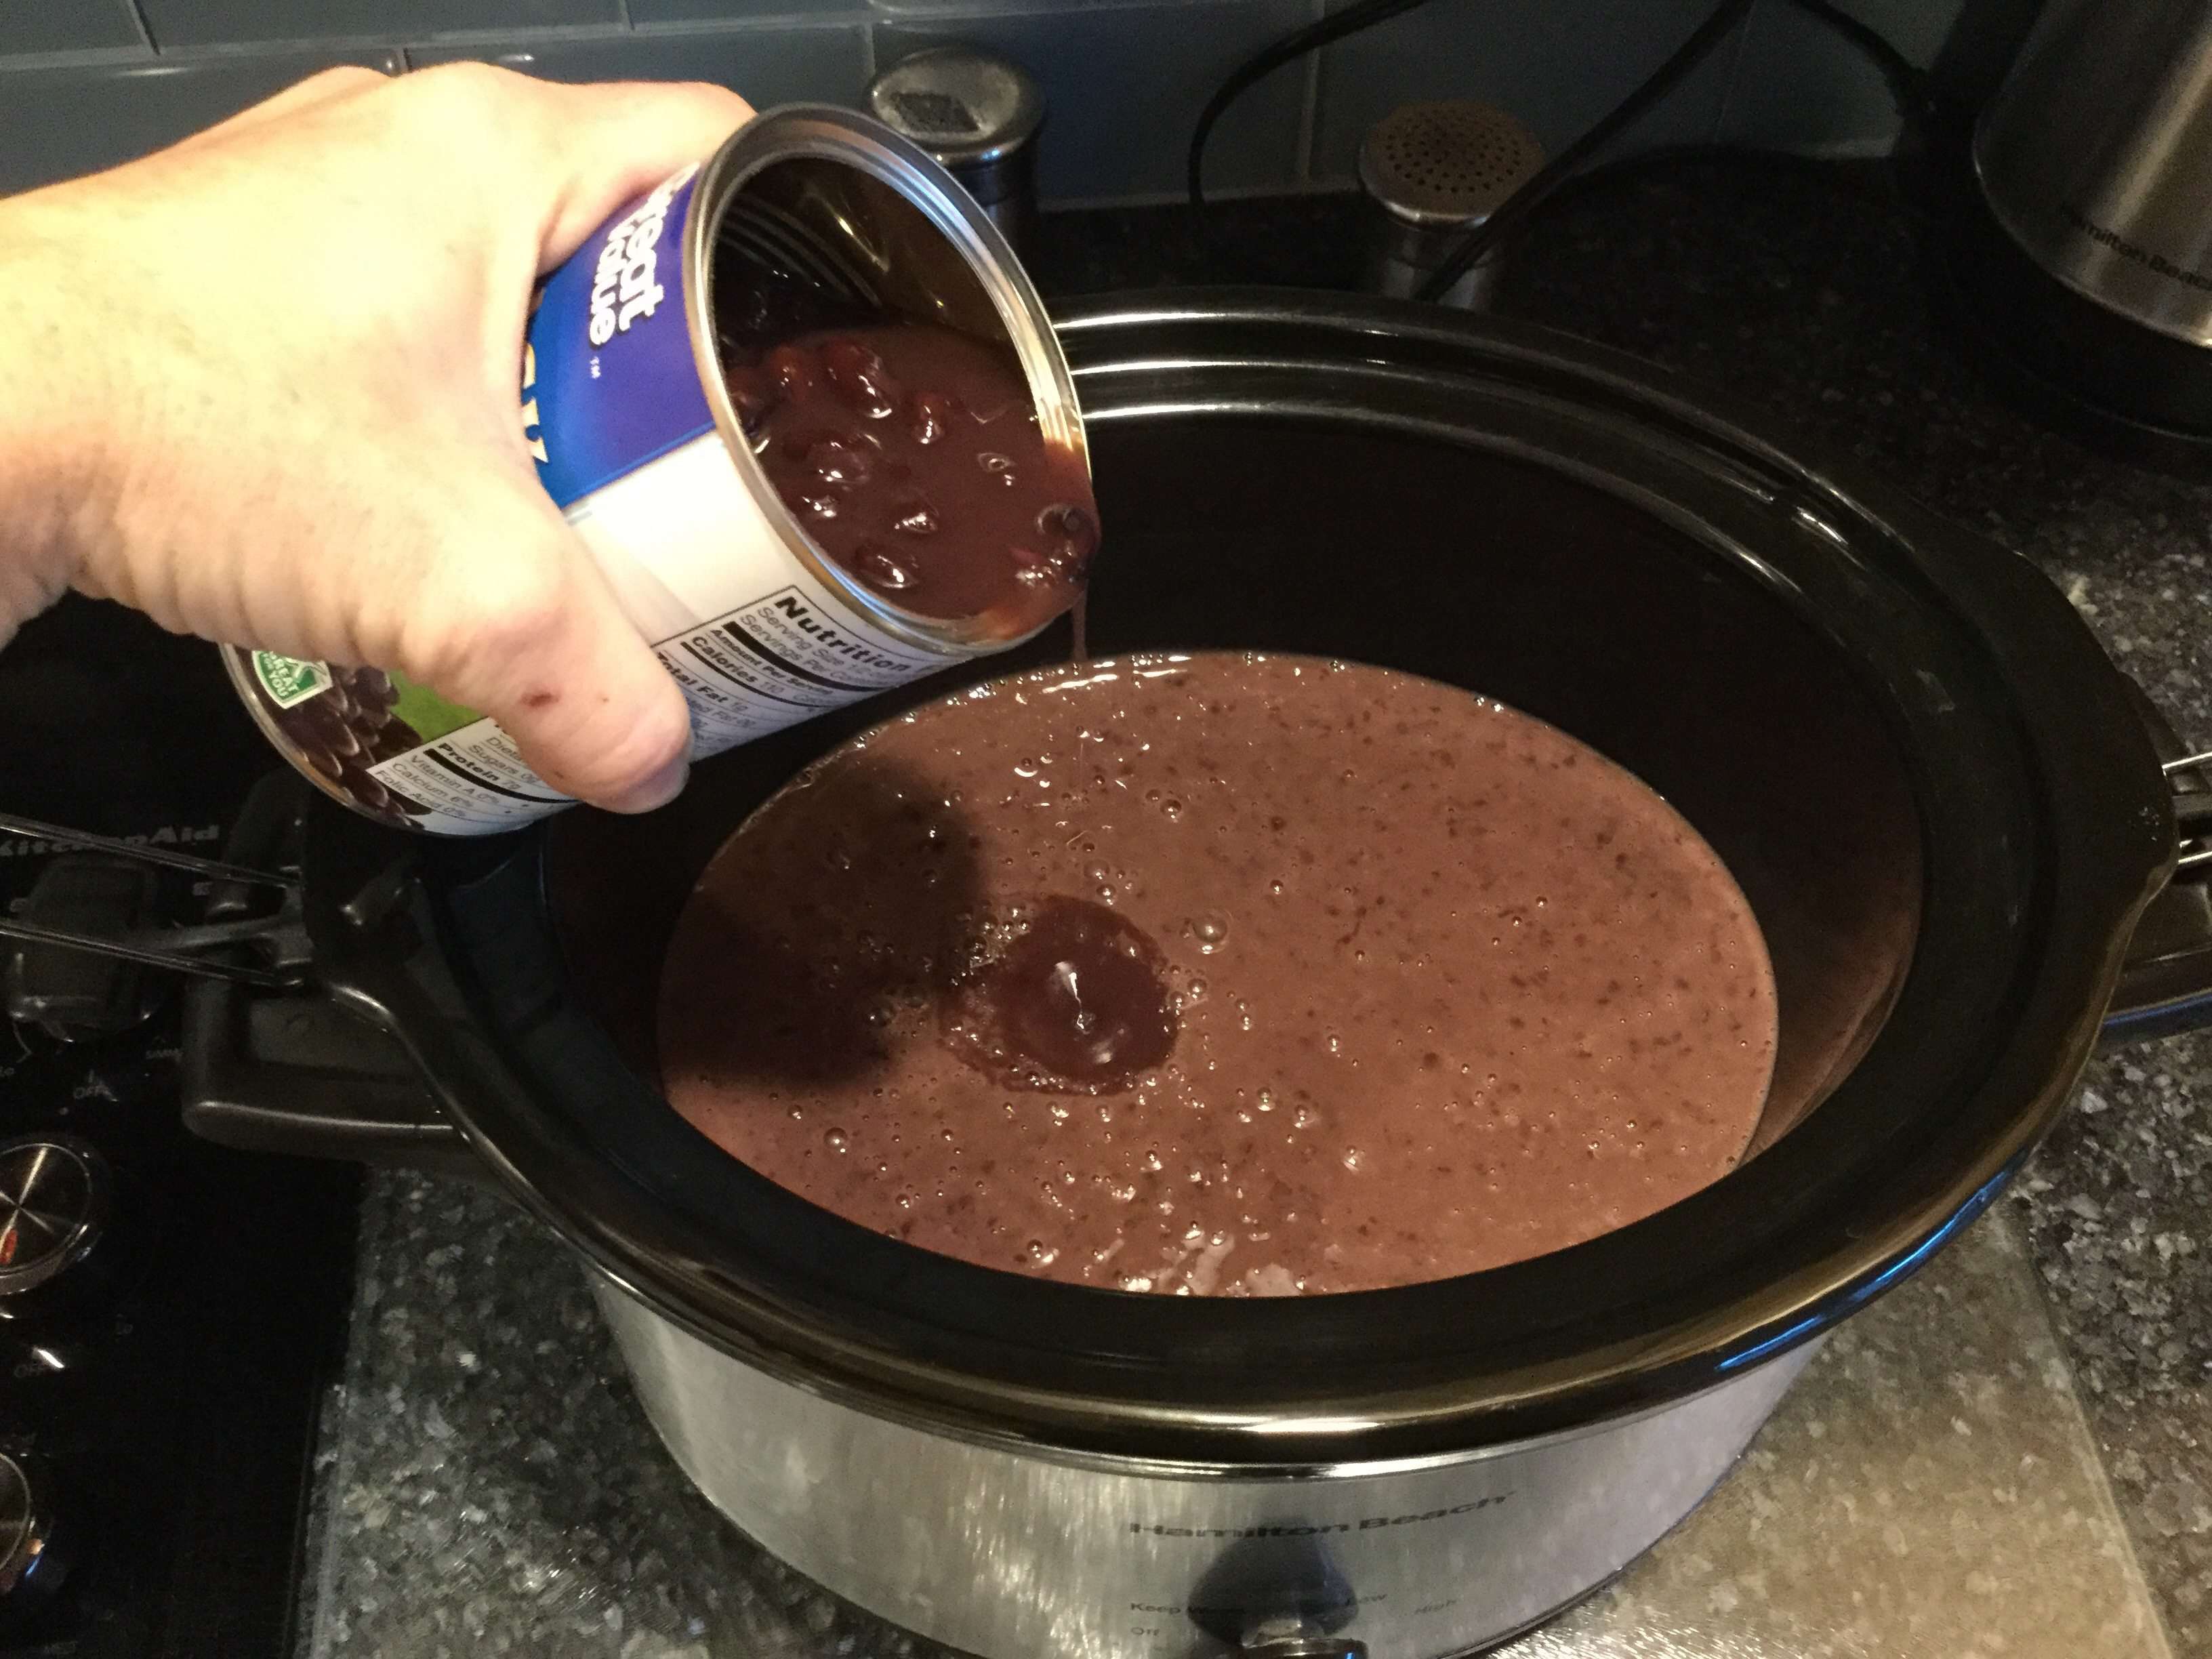 Pour mixture into slow cooker and add last can of black beans into the mixture.